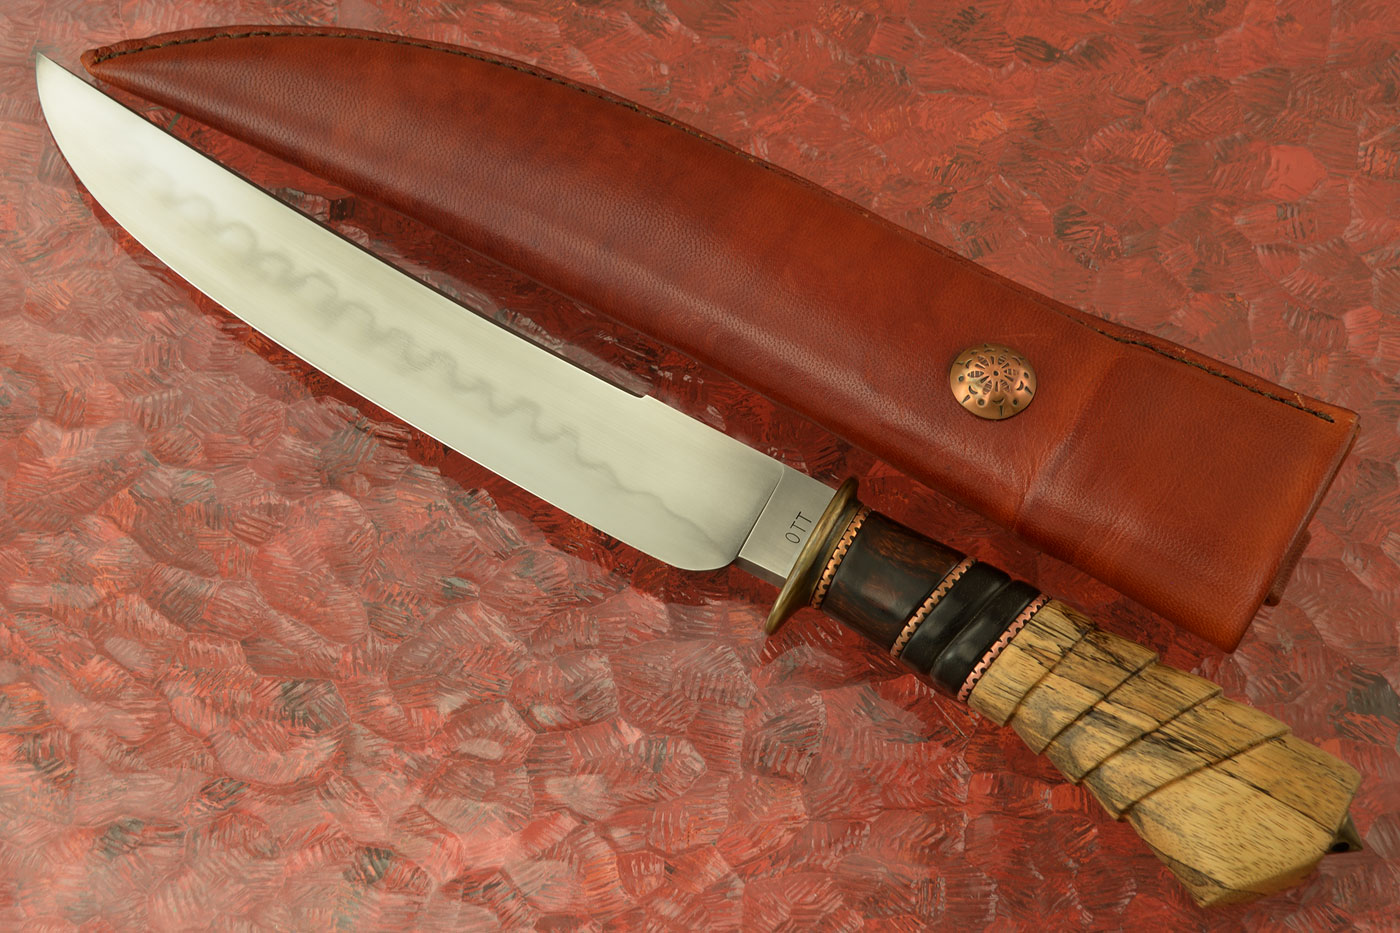 Hamon Fighter with Sculpted Spalted Tamarind